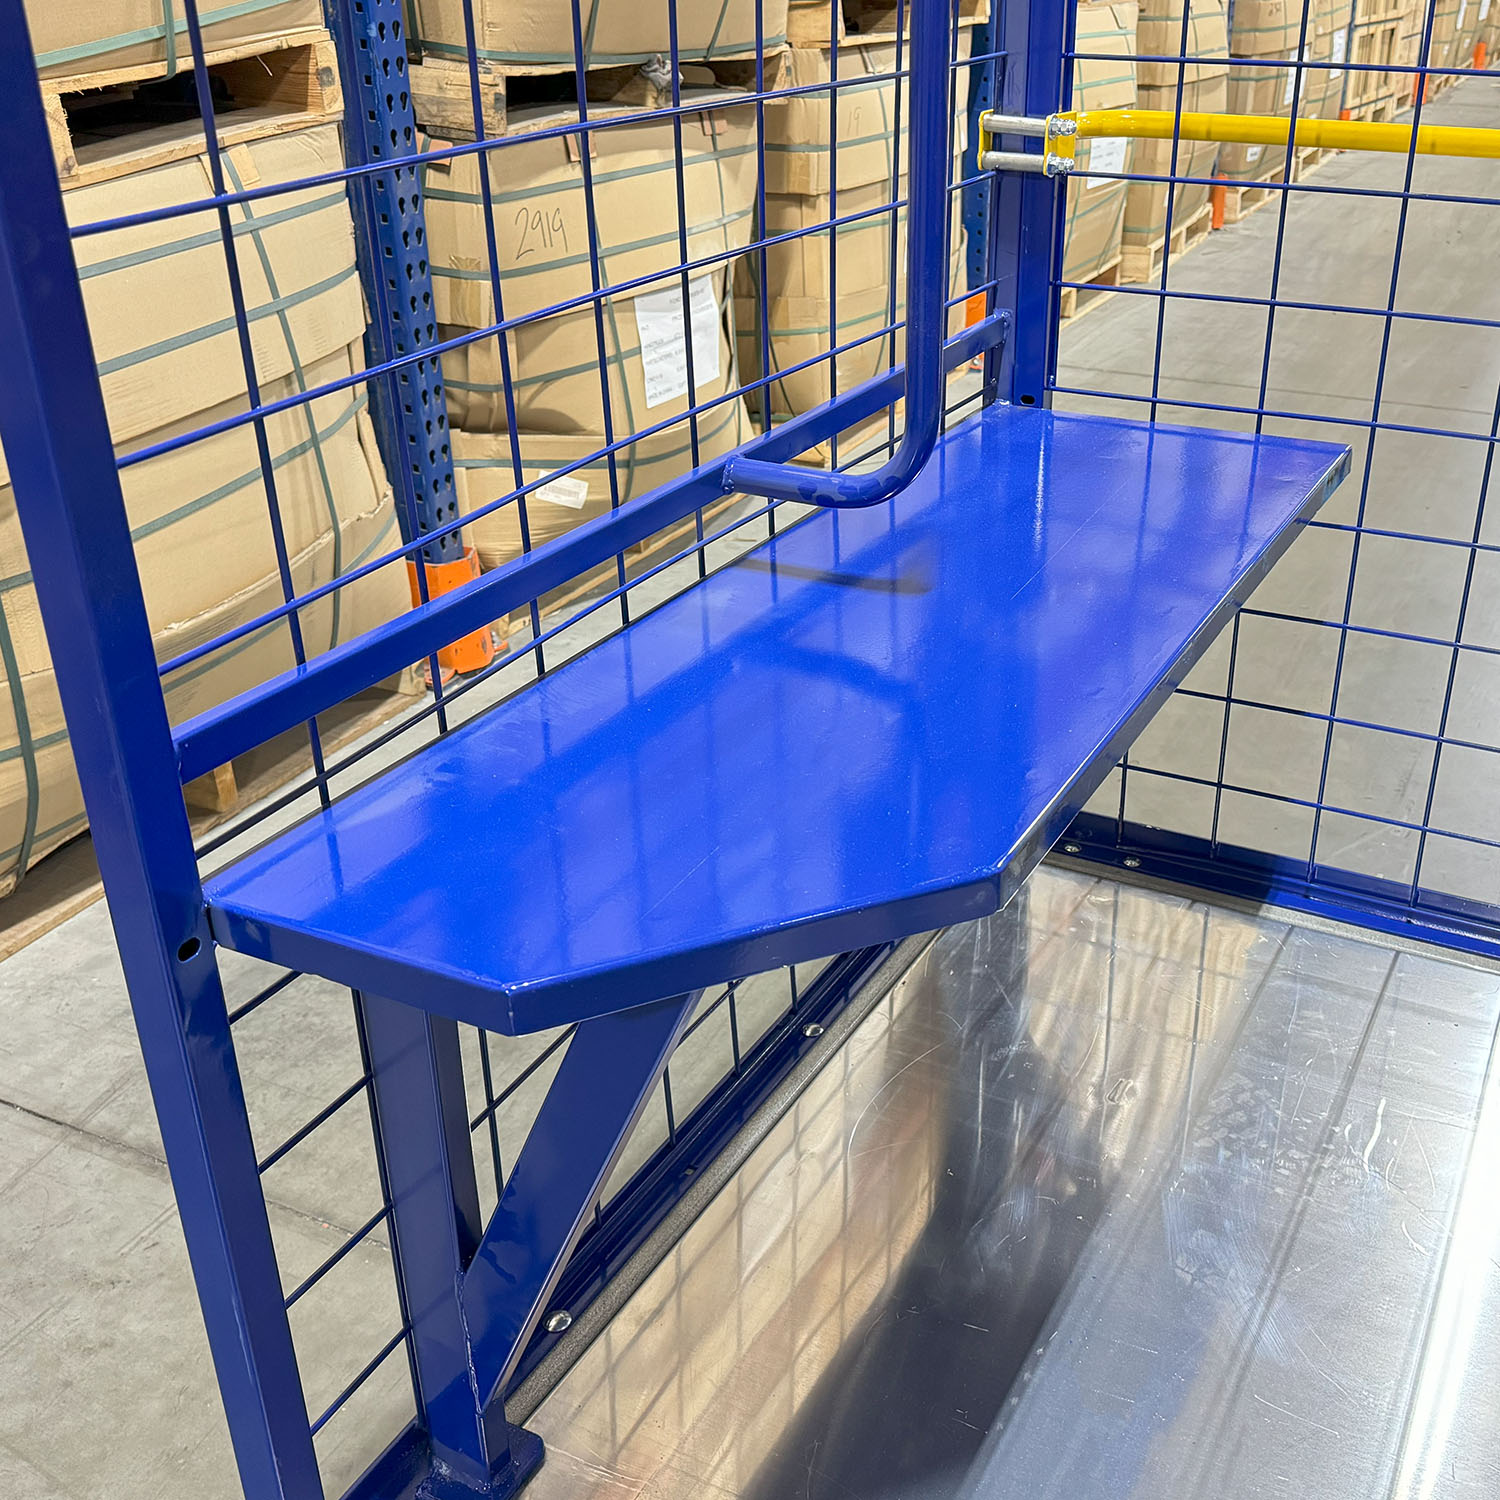 Material handling INDUSTRIAL CARTS, picking cart, picking cart | National Cart picking Utility Cart, Distribution Cart, picking cart, ecom cart, ecommerce cart, ecommerce picking cart, picking cart, grocery cart, grocery picking cart, department store cart, beverage cart BACK STOCK CARTS Picking Cart Rolltainer, order picker cart, order picking cart 3- Shelf Slant Pick Cart Picking Cart Material handling INDUSTRIAL CARTS, picking cart | National Cart picking Utility Cart, Distribution Cart, ecom cart, ecommerce cart, ecommerce picking cart, picking cart, grocery cart, grocery picking cart, department store cart, beverage cart BACK STOCK CARTS Picking Cart Rolltainer, order picker cart, order picking cart, tote cart, 6 shelf cart, two shelf cart, replacement cart, Slant cart cart stock ladder cart ladder carts Vertical Stocking Cart for Retail Spaces • Stair-Accessible Merchandising Solutions Innovative Safety Features for Stocking Carts Efficient Vertical Storage Carts for Businesses Compact Stairway Cart for Retail Environments Employee-Friendly Stocking Solutions Space-Saving Stair Carts for Retail Stores Staircase Accessible Merchandising Tools Occupational Safety Carts for Retail Employees Vertical Shelf Stocking Solutions for Businesses